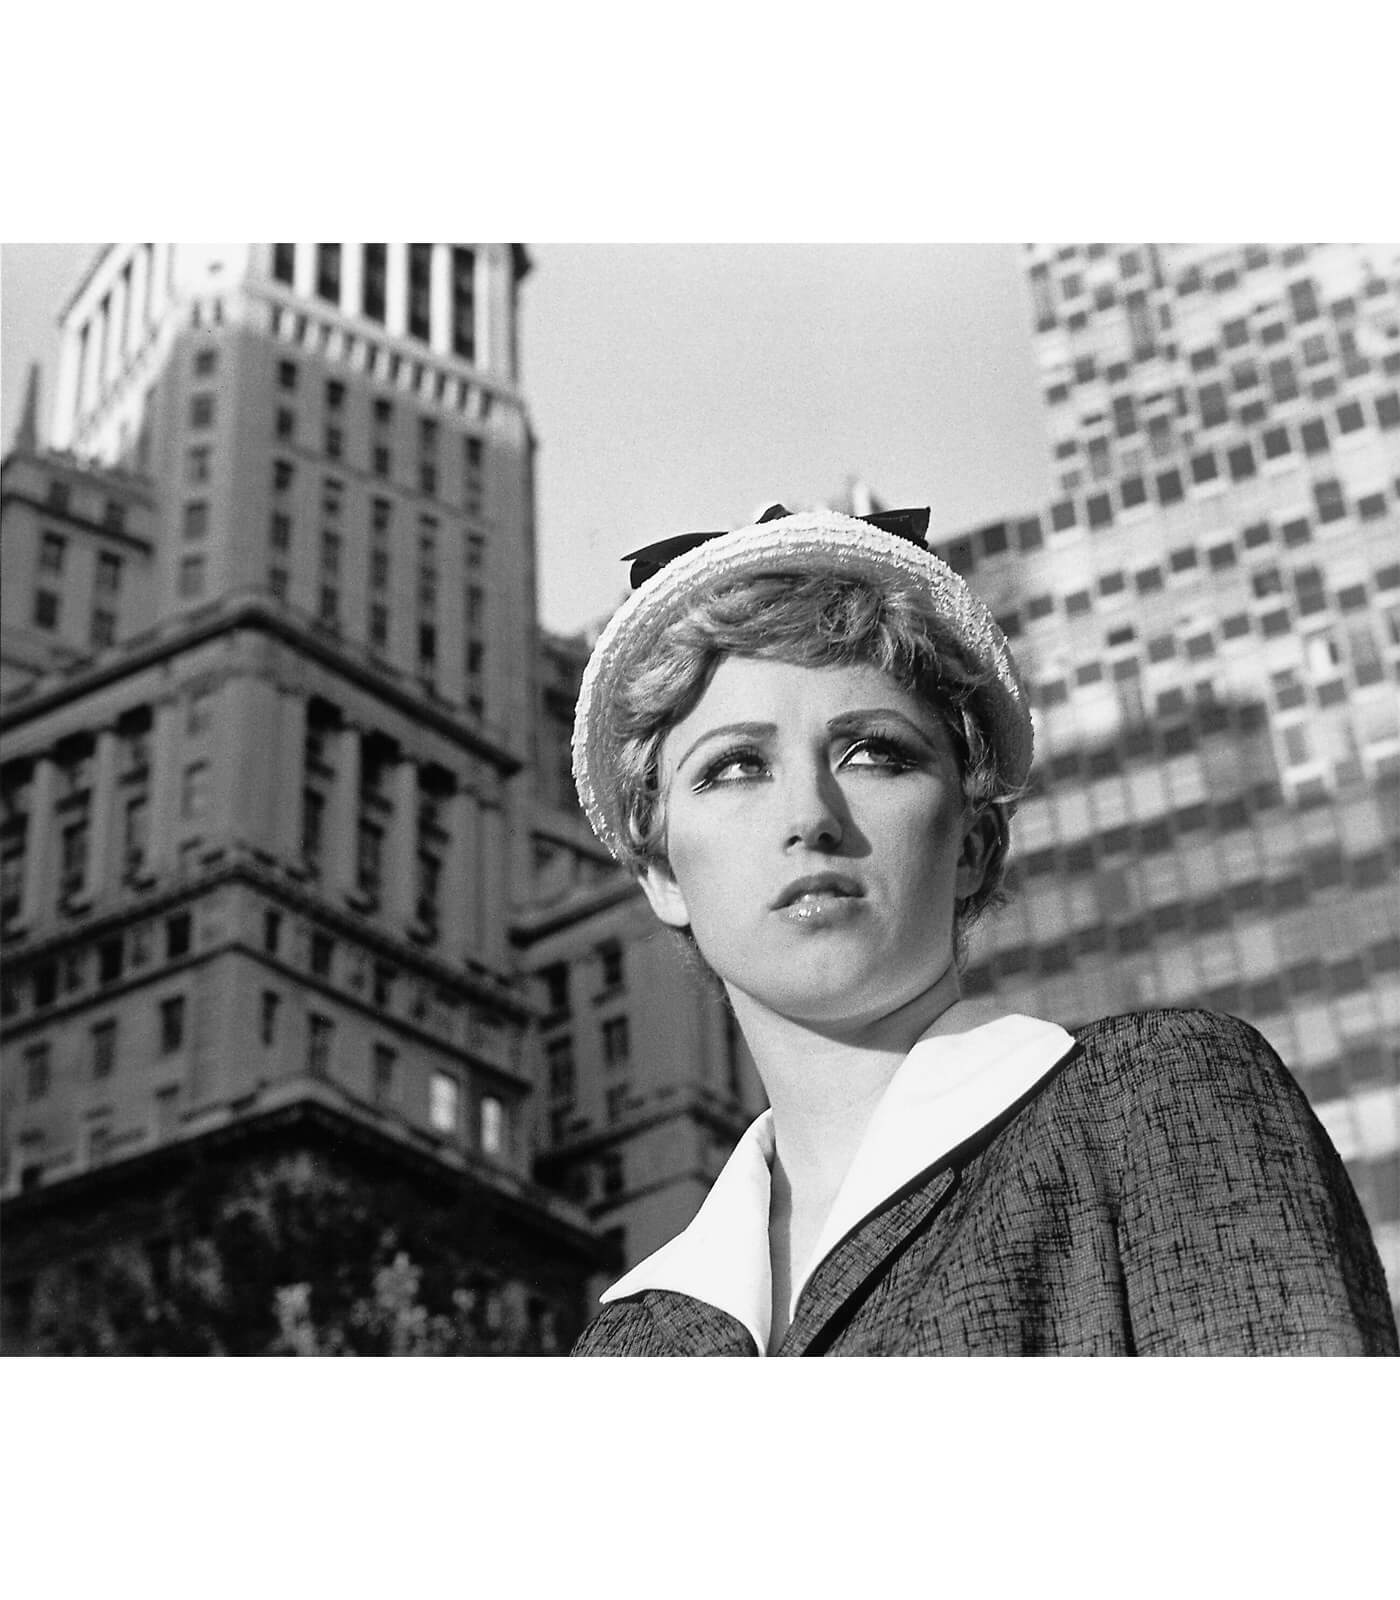 A Touch of Autobiography in Cindy Sherman's New Classic Hollywood